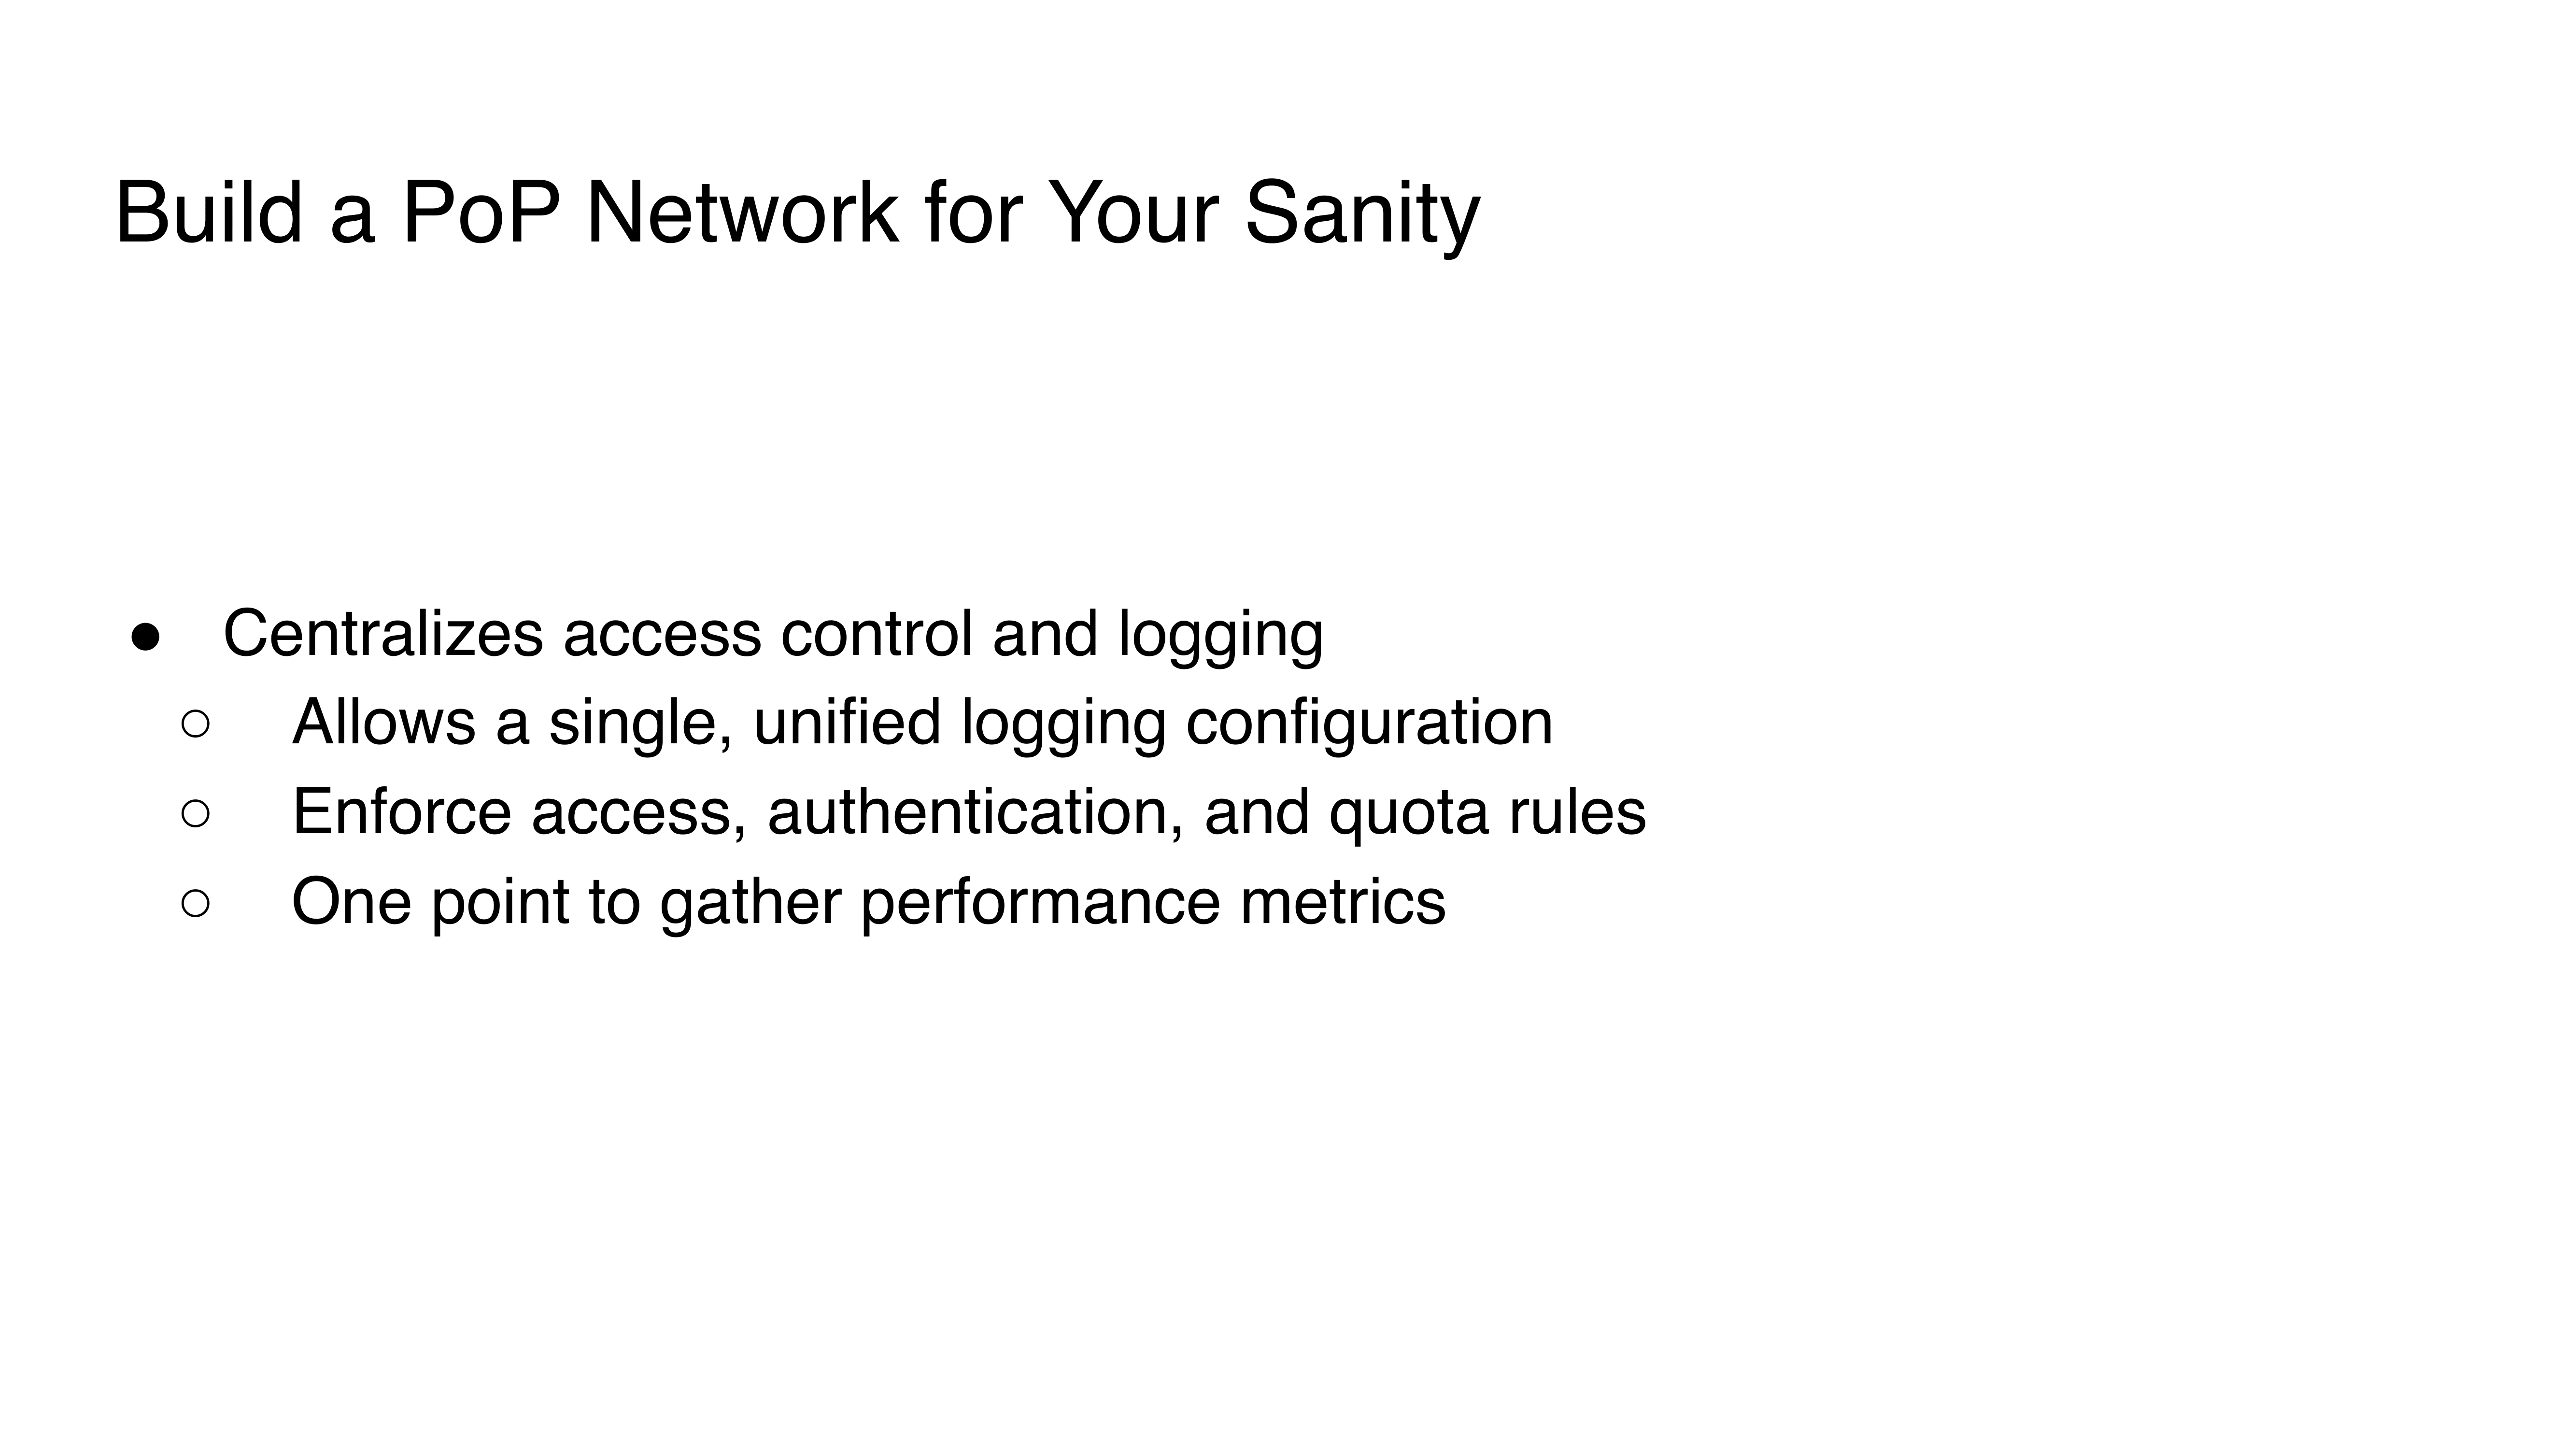 10.-build-a-pop-network-for-your-sanity_centralizes-access-control